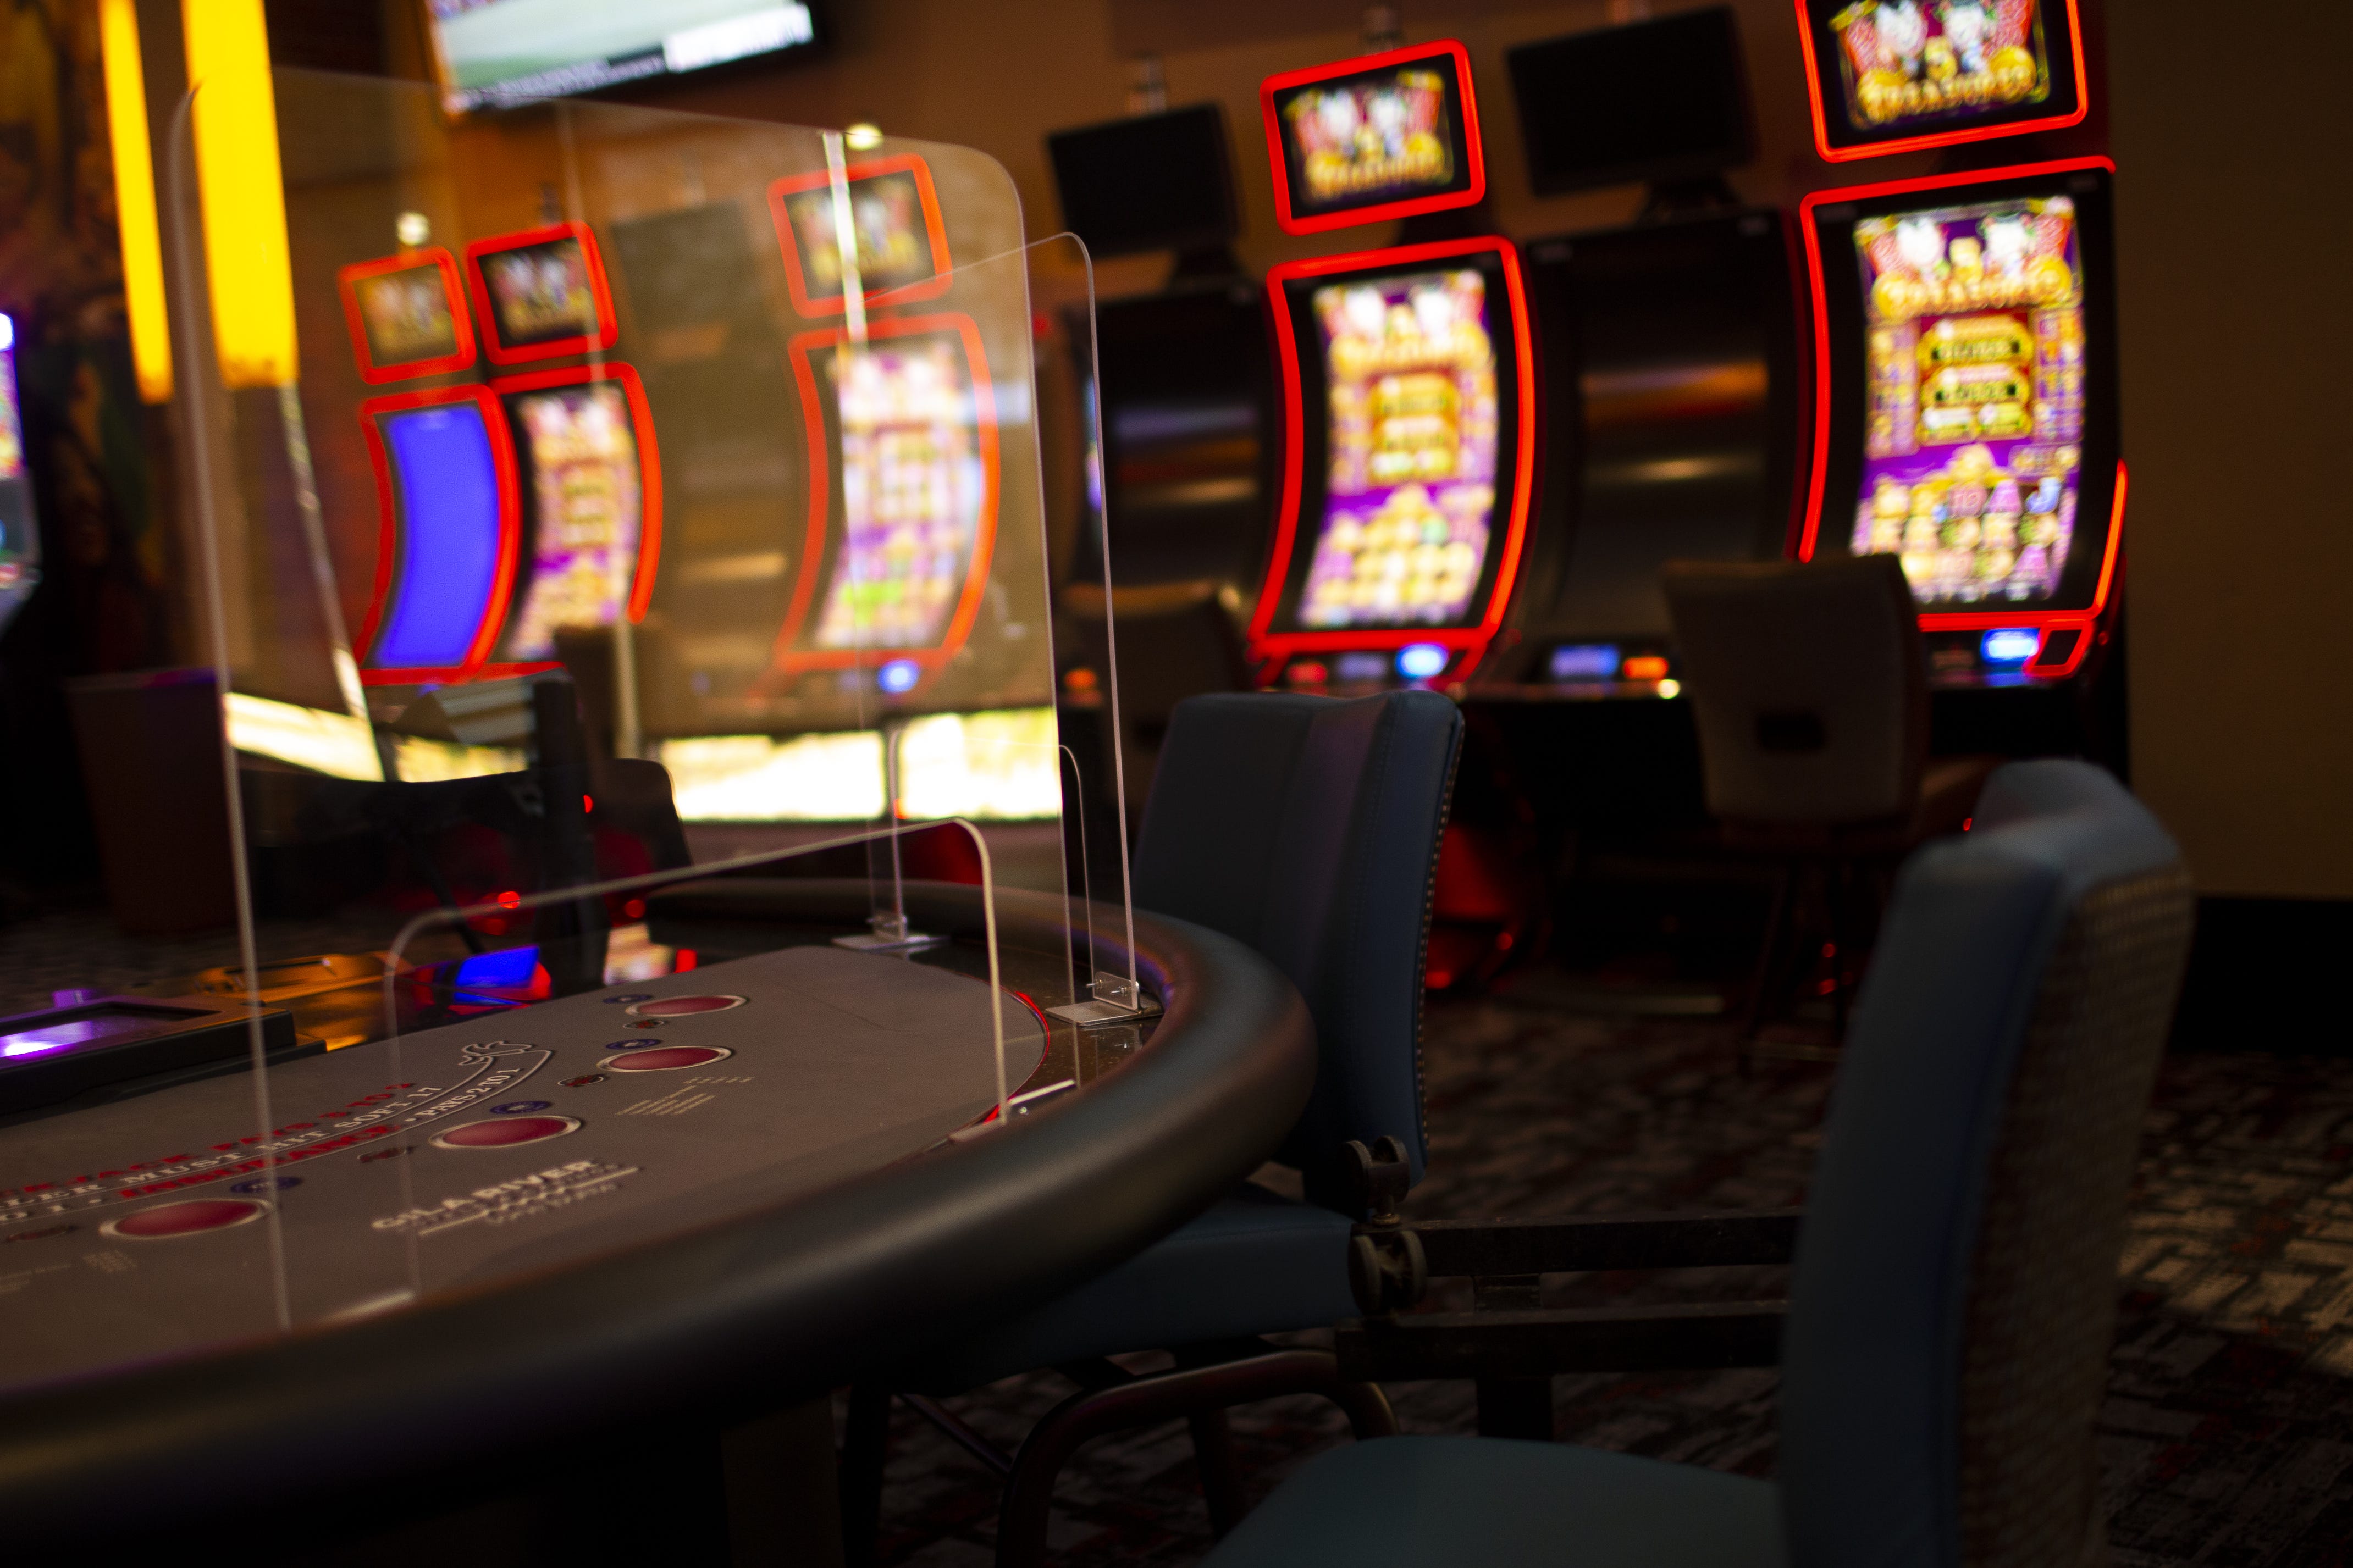 Casinos Gambling Rules – How To Play Well And Safe